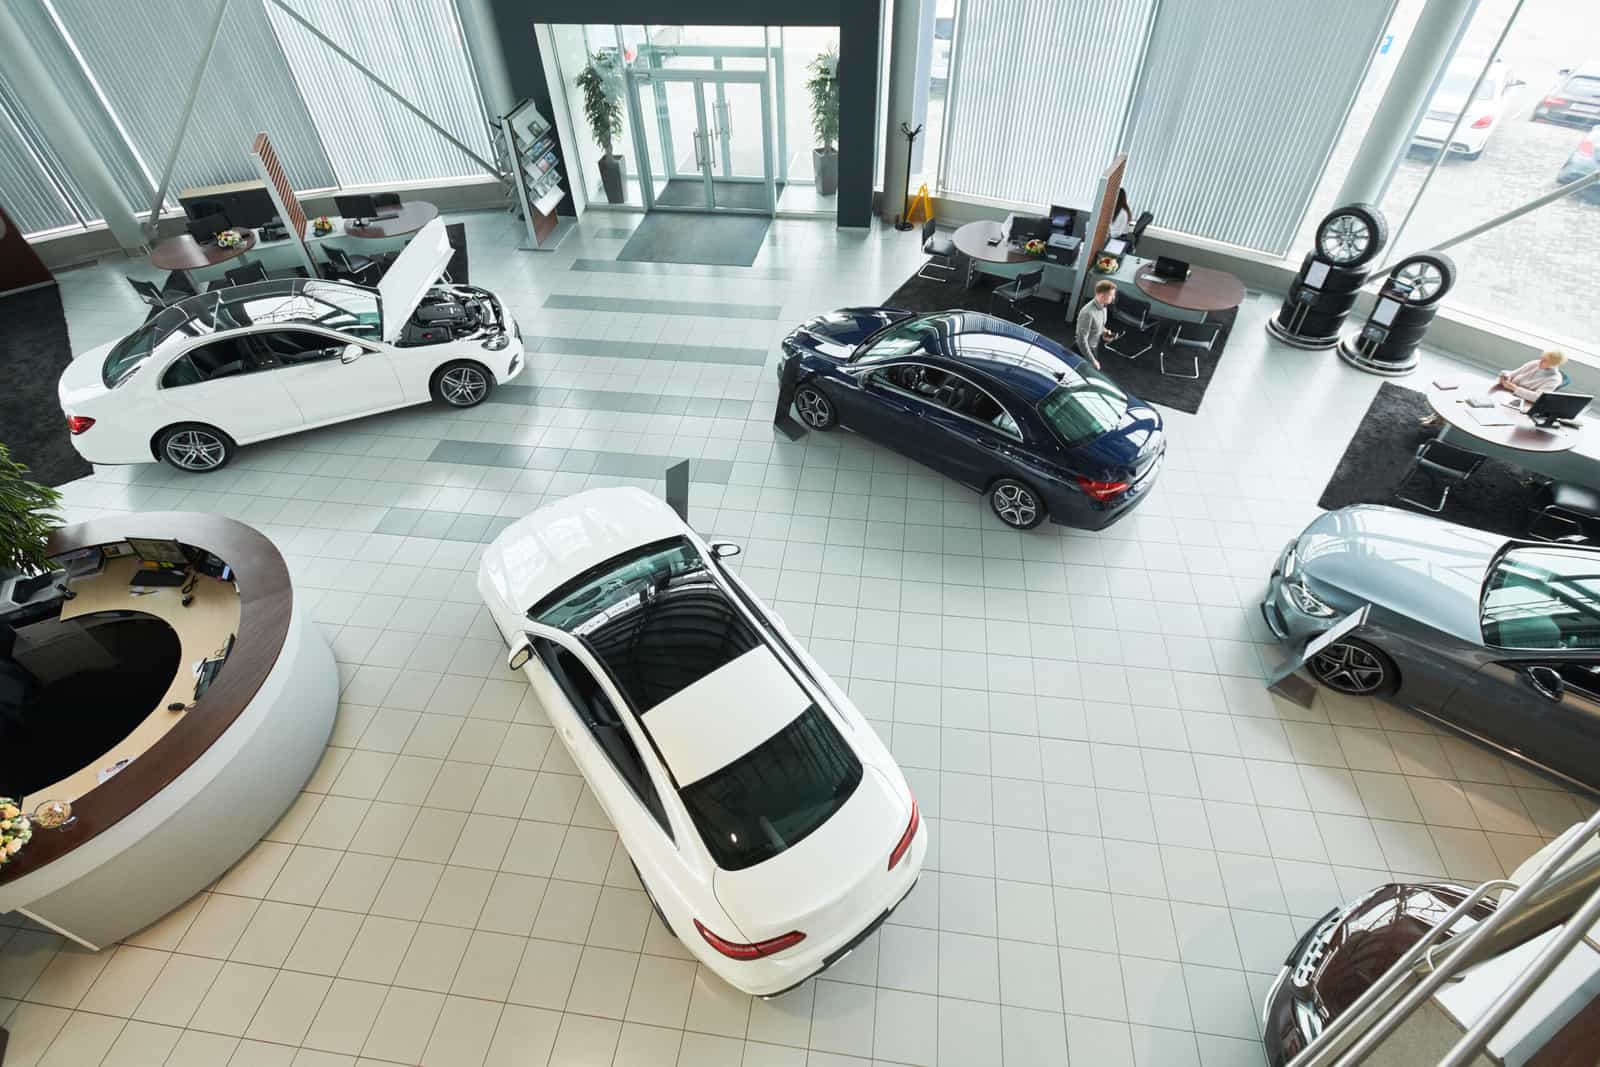 Dealership showroom floor with several cars